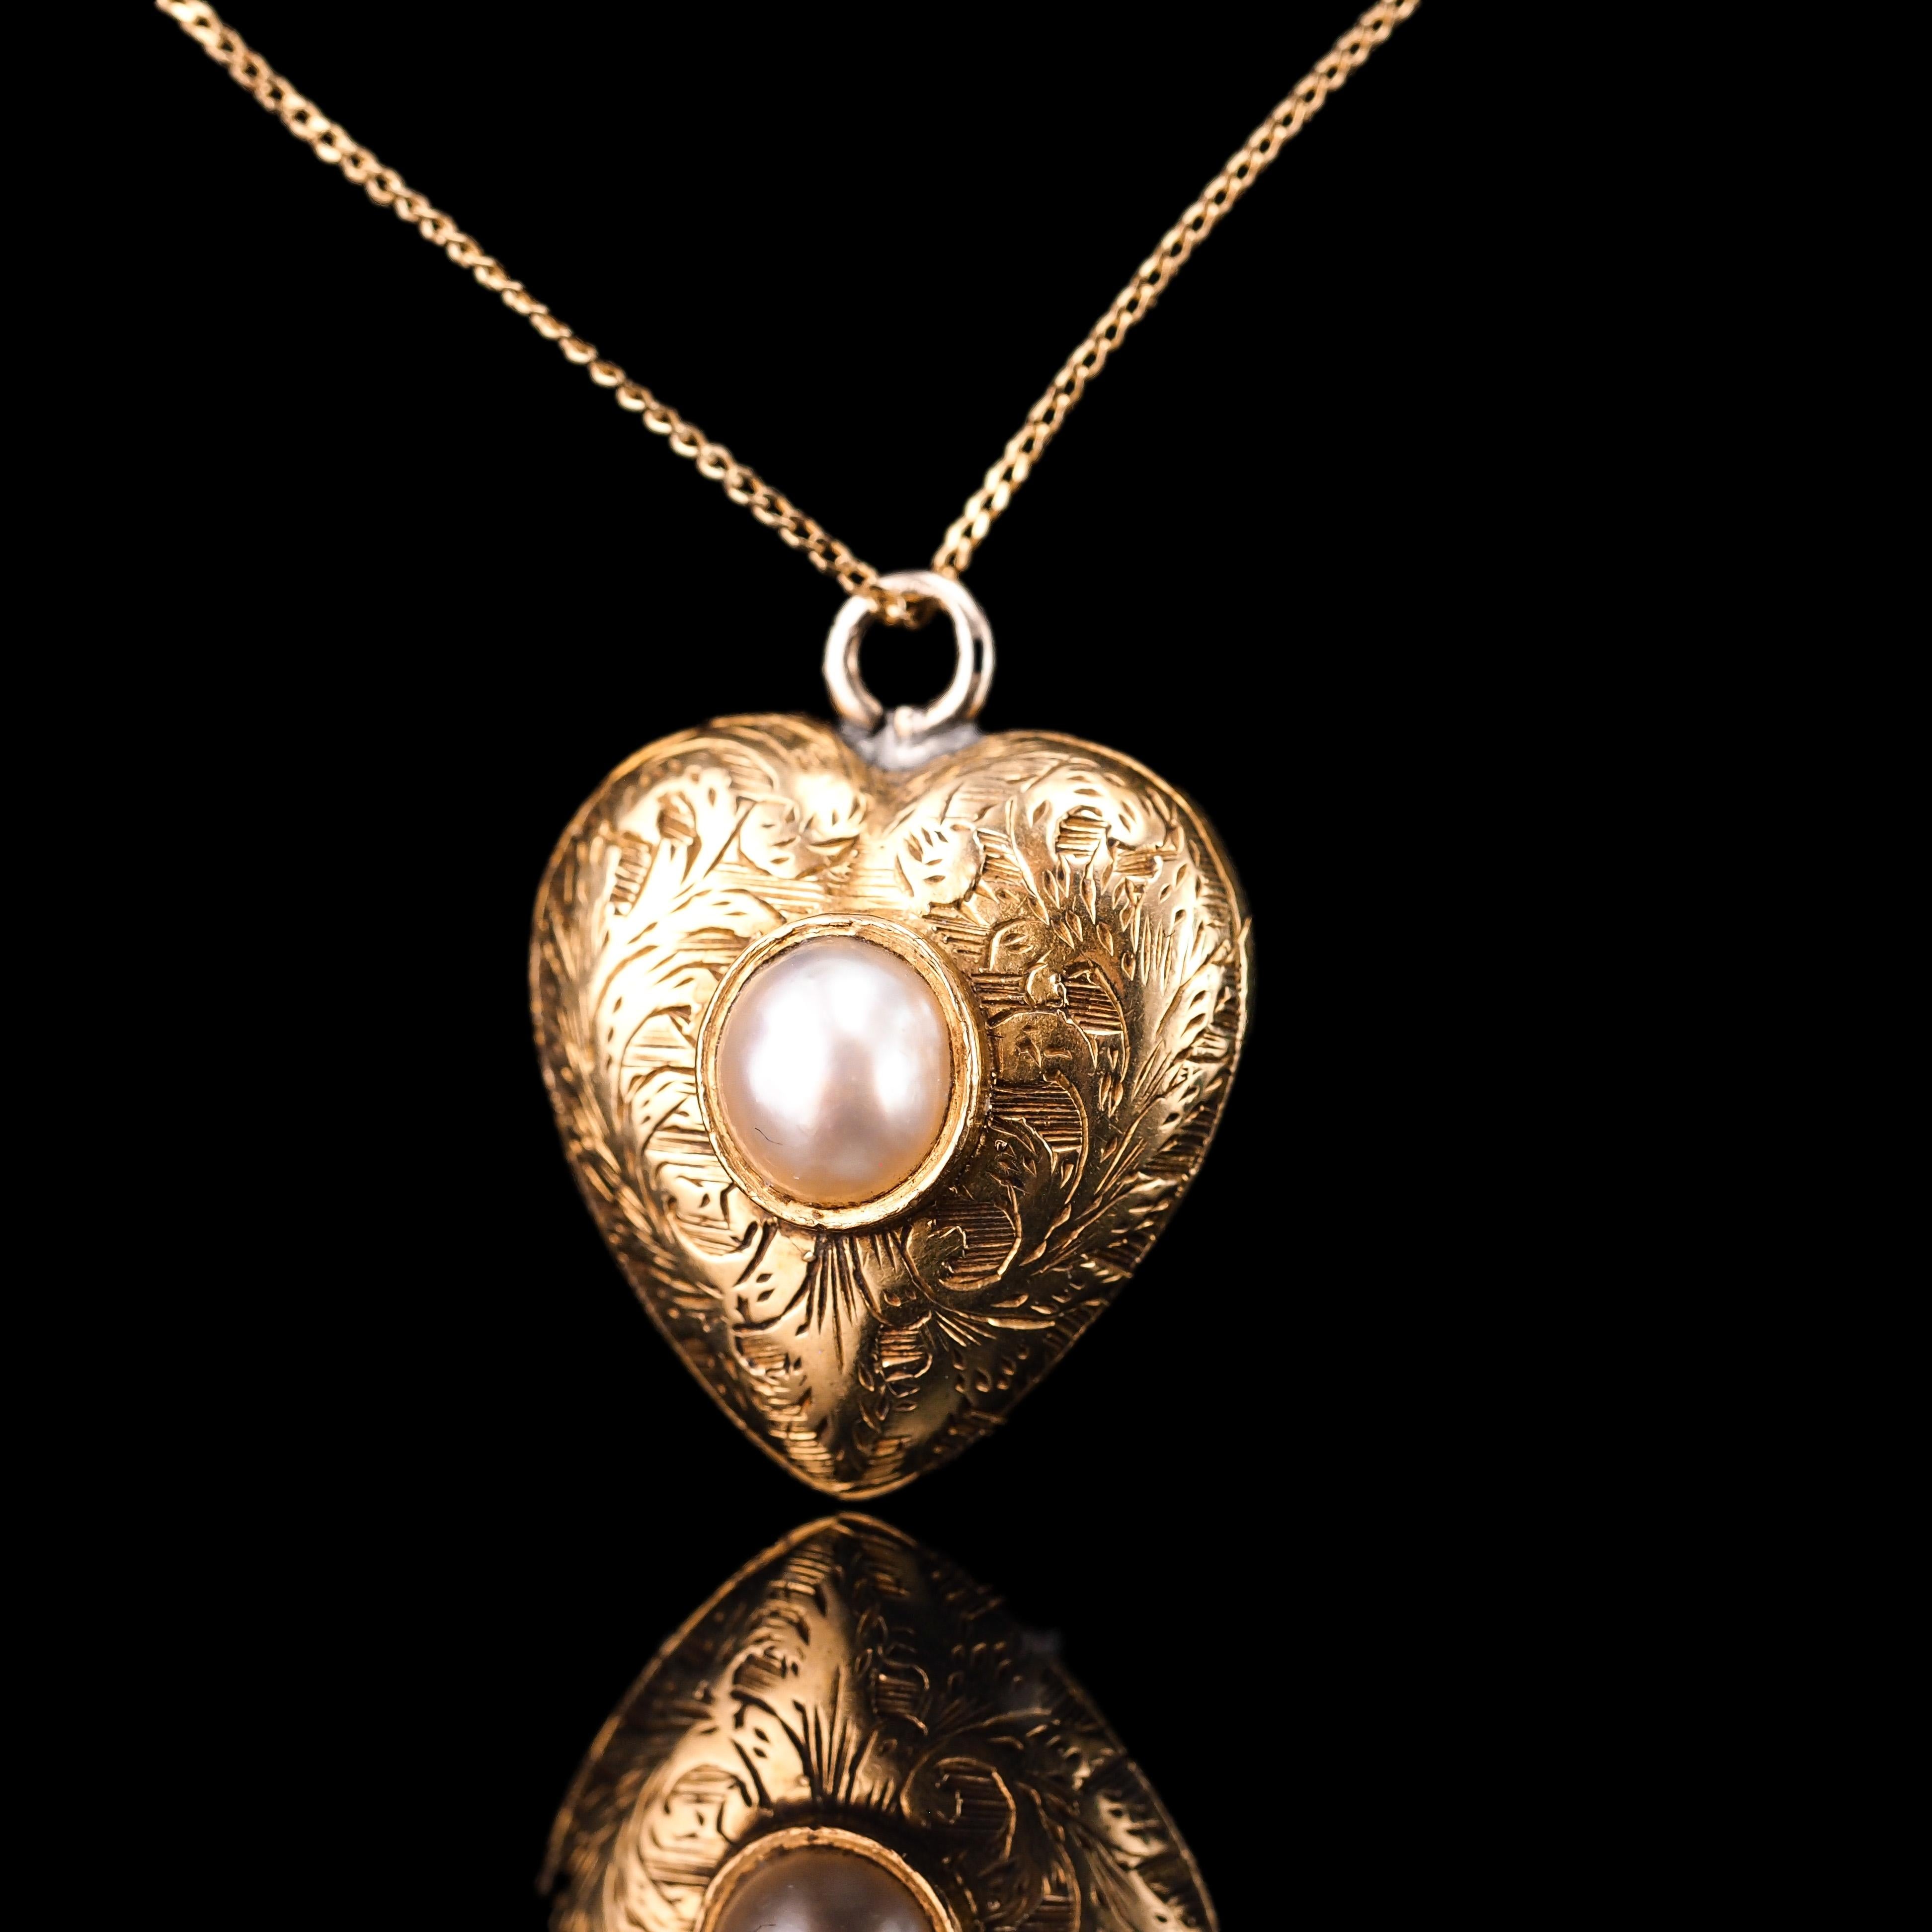 Antique 18K Gold Heart Charm Pendant Necklace with Pearl - Victorian c.1890 5